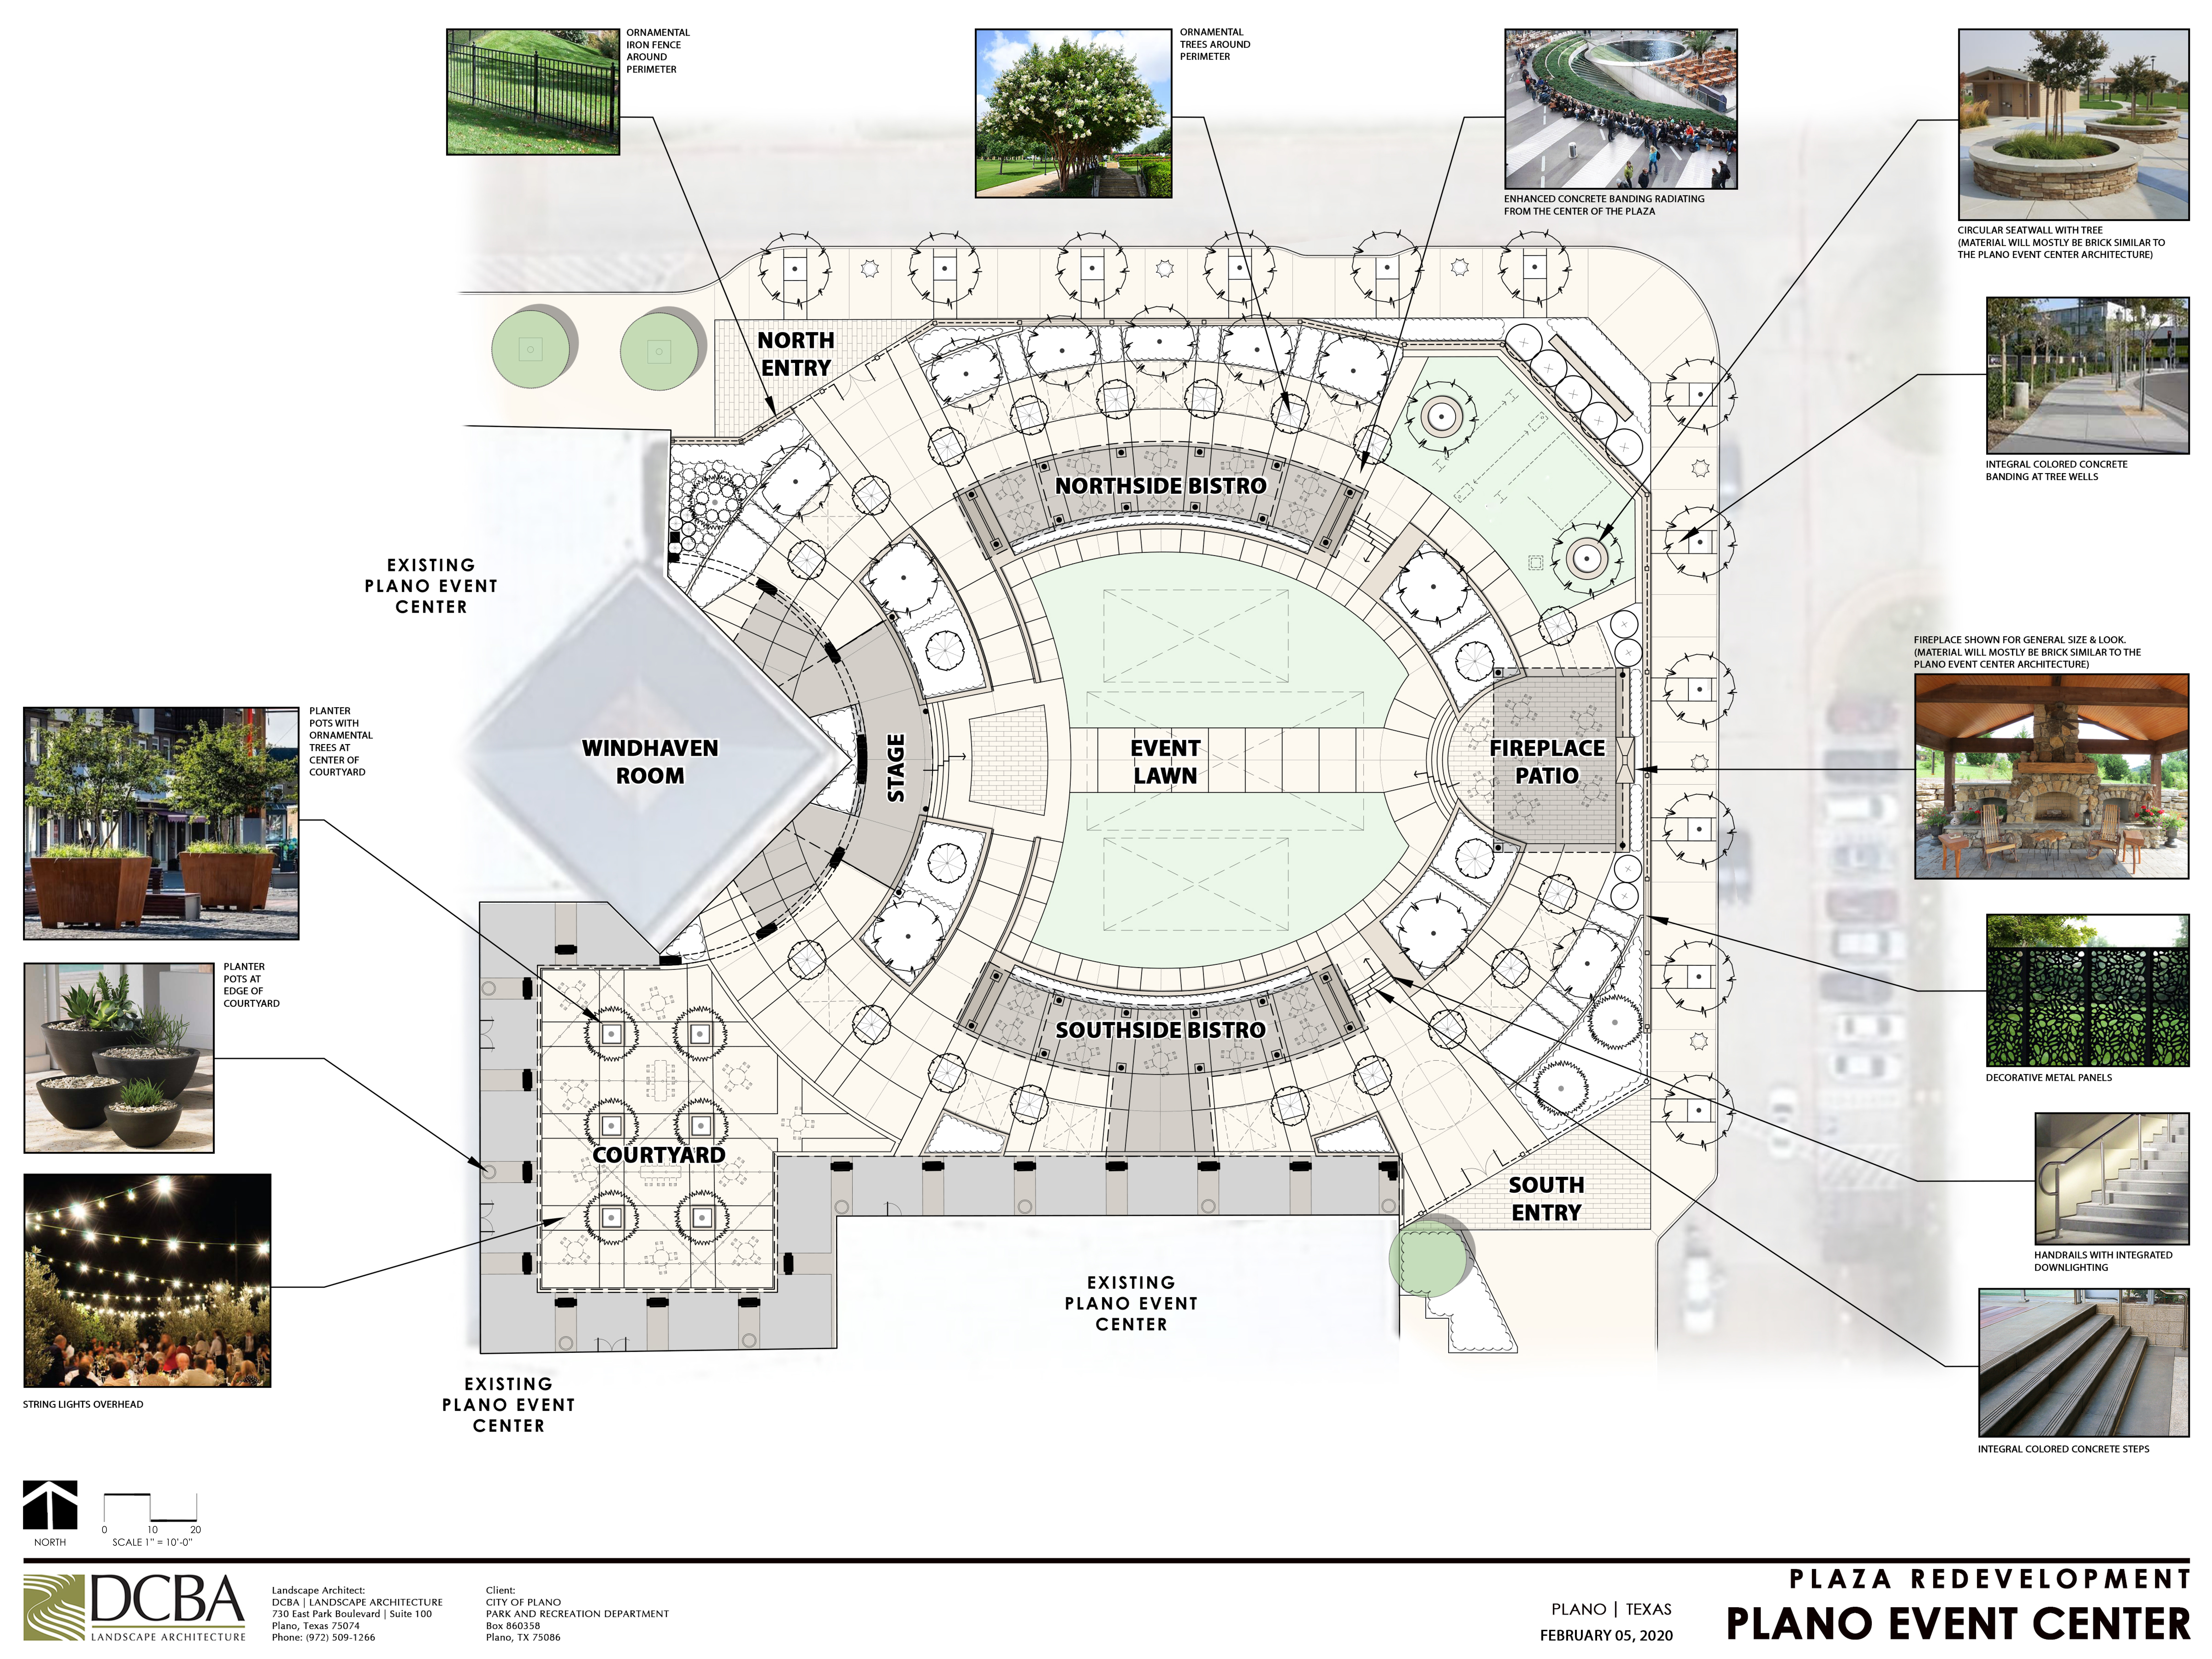 Plano Event Center courtyard renovation detailed rendering